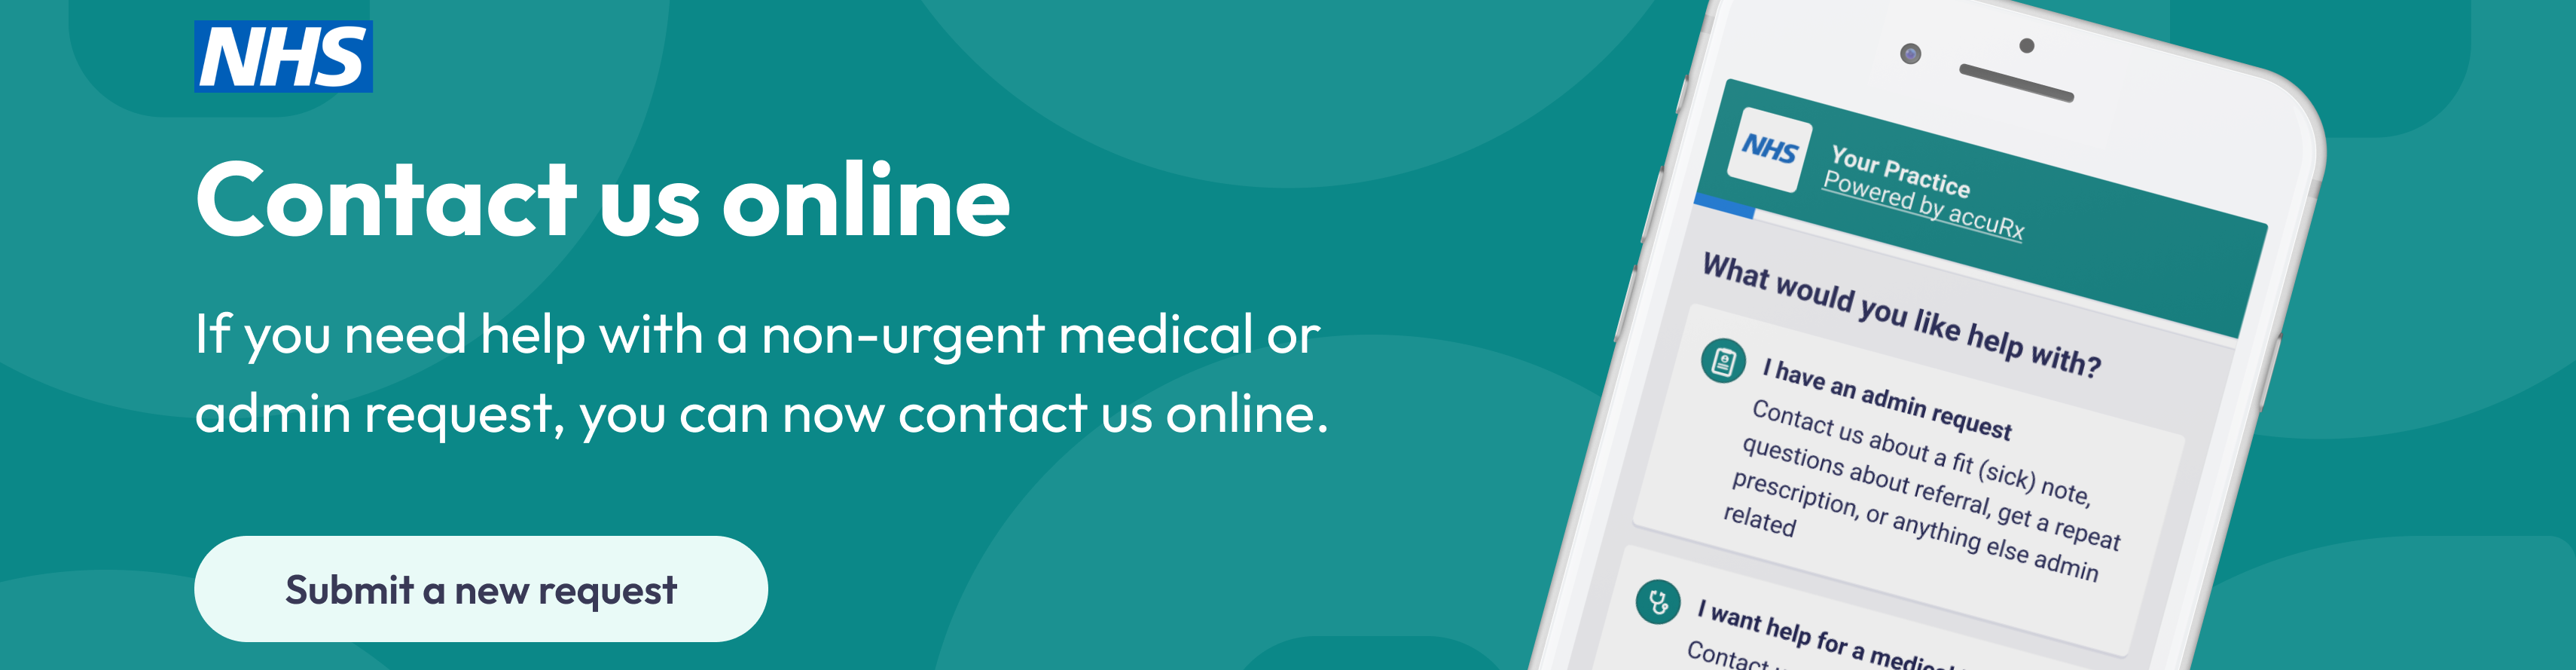 contact your pg practice online for any non urgent medical or admin requests. Banner linked to online form